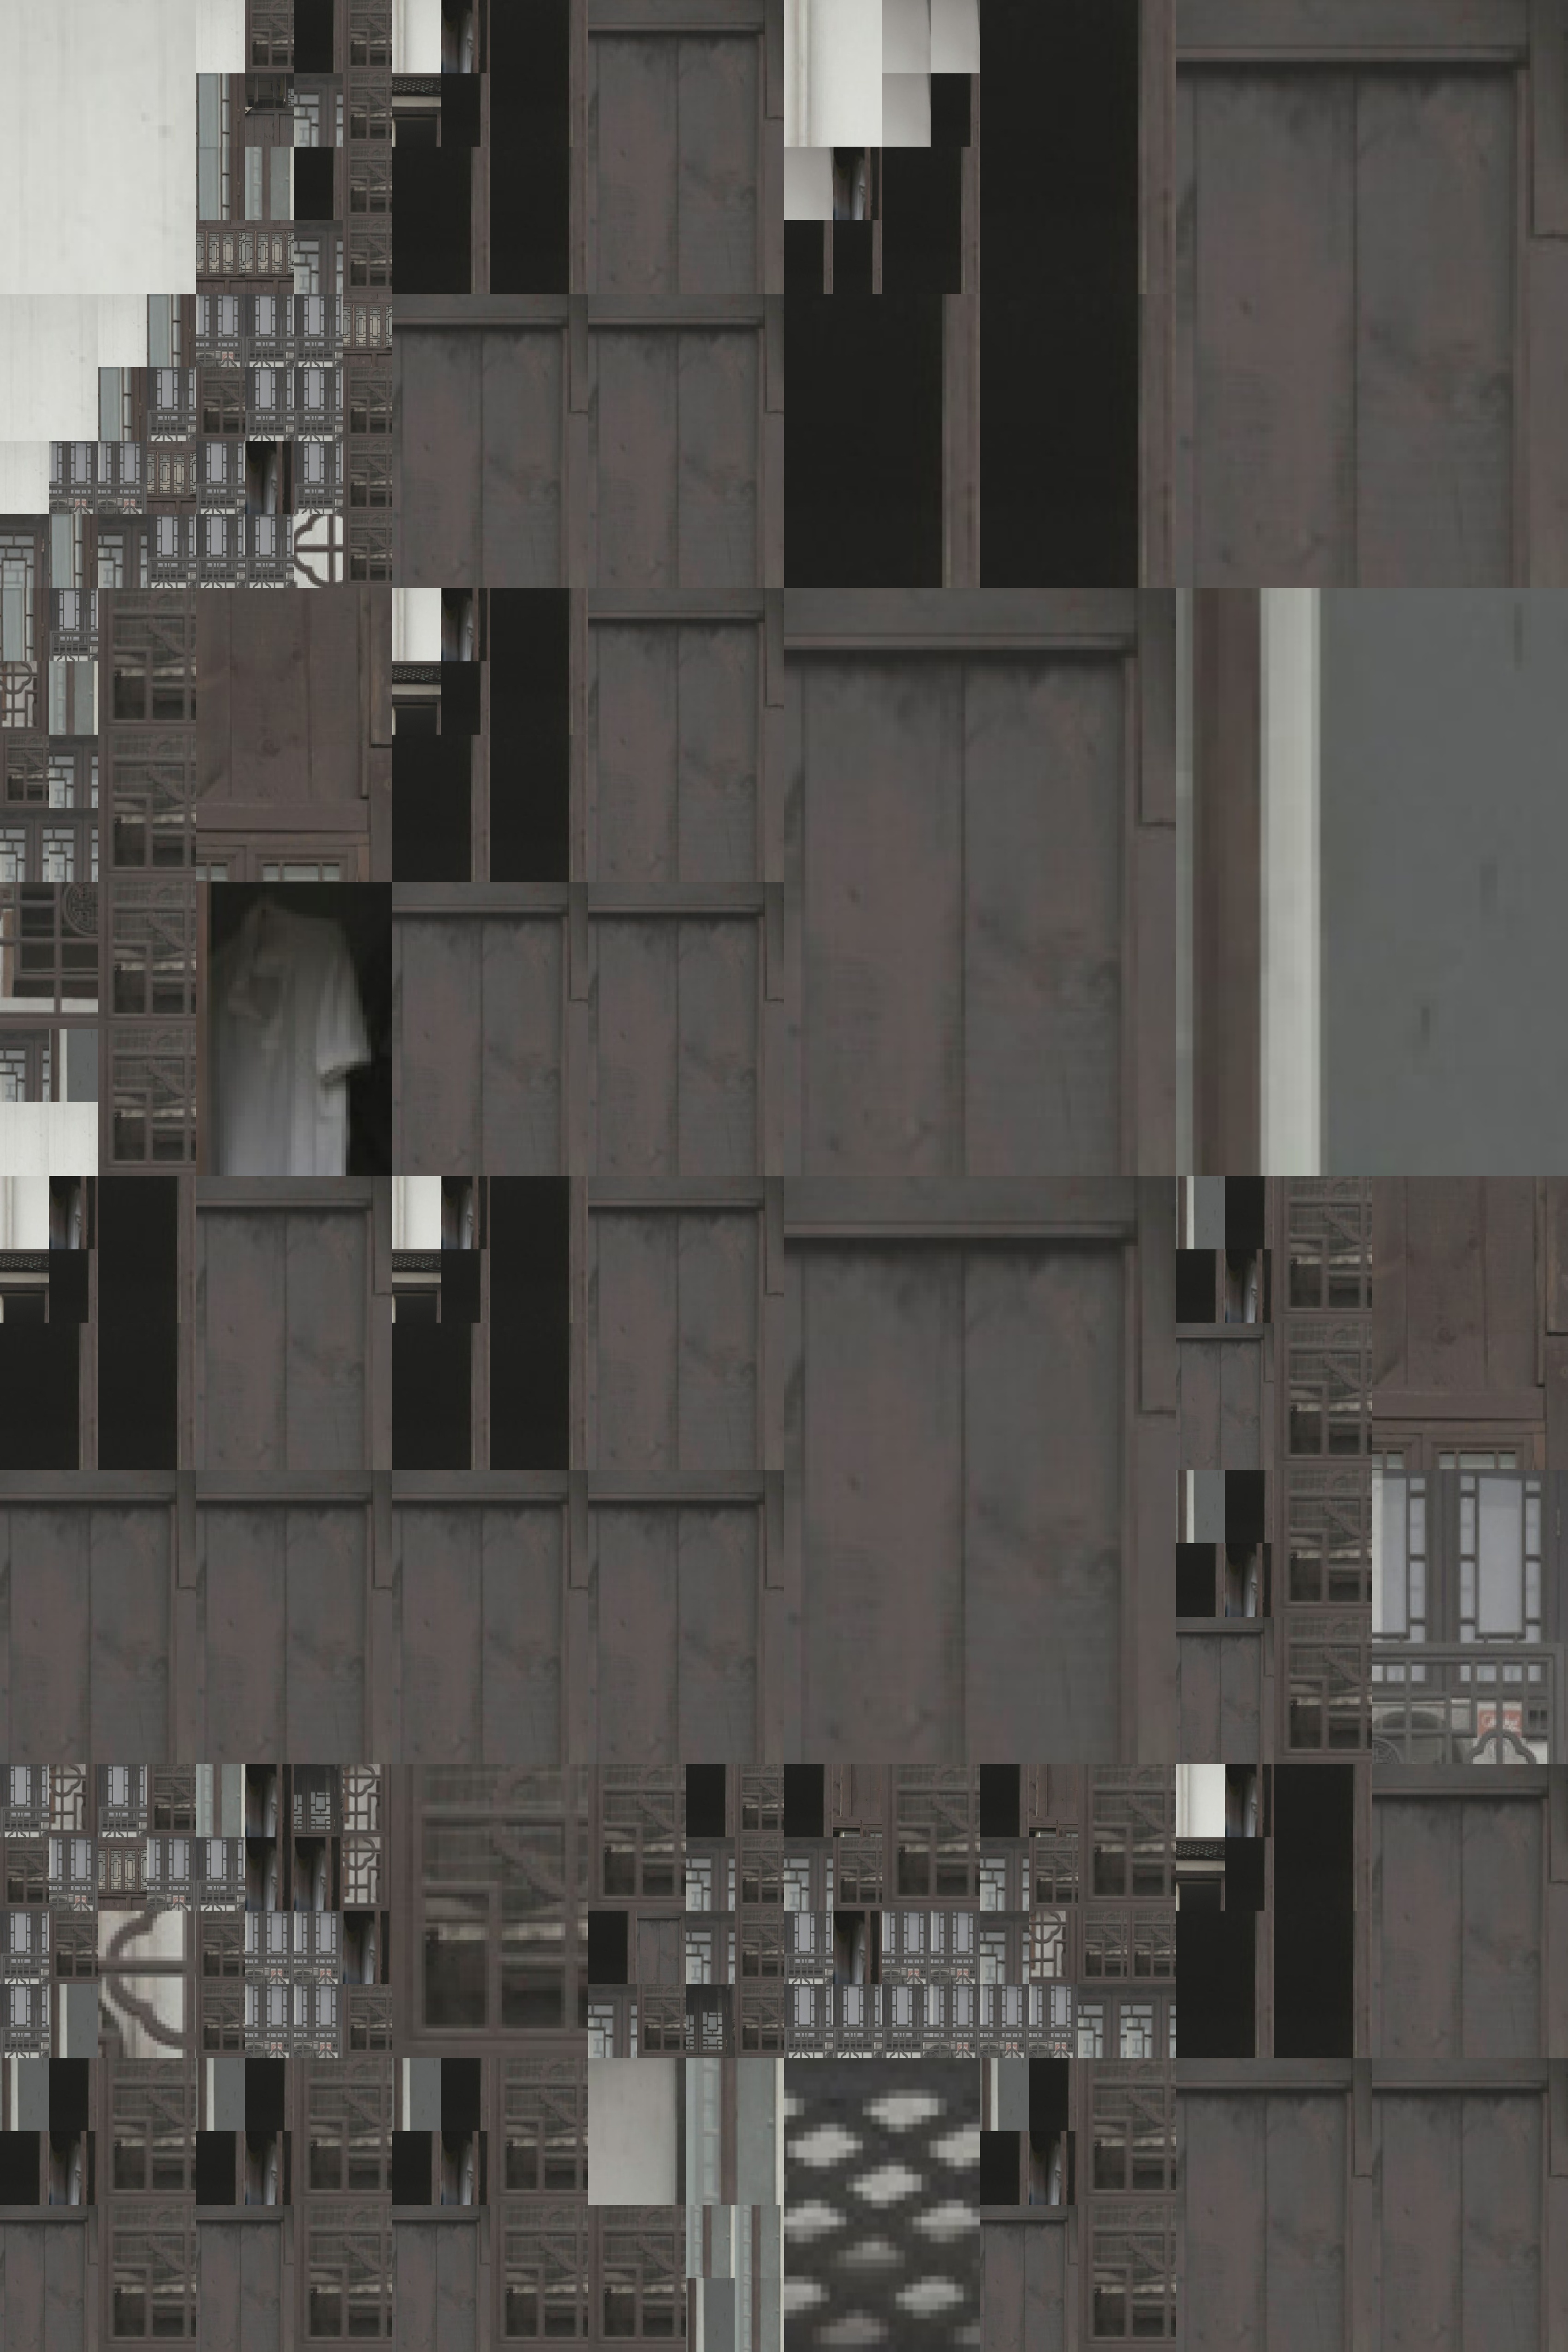 A computer-generated image comprised of gray boxes of various shades and sizes.